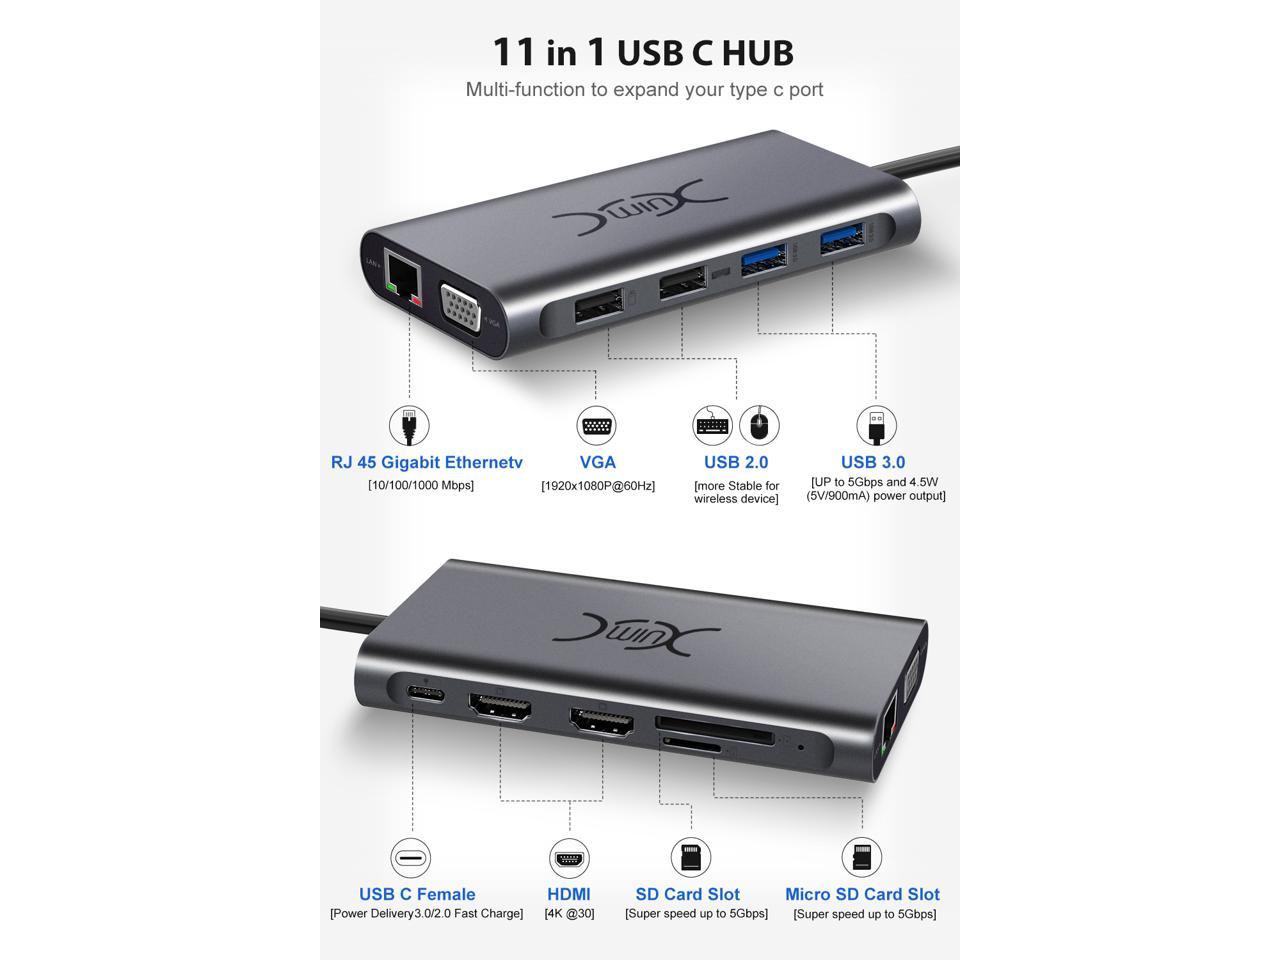 Dell and Type C Devices VGA HOPLAZA USB C hub Compatible with MacBook Pro 2017+/Air/M1/Pad 3+/Air 2020+ USB C HDMI Adapter with dual 4K HDMI 3 USB 3.0 and TF/SD Card Reader Docking Station PD